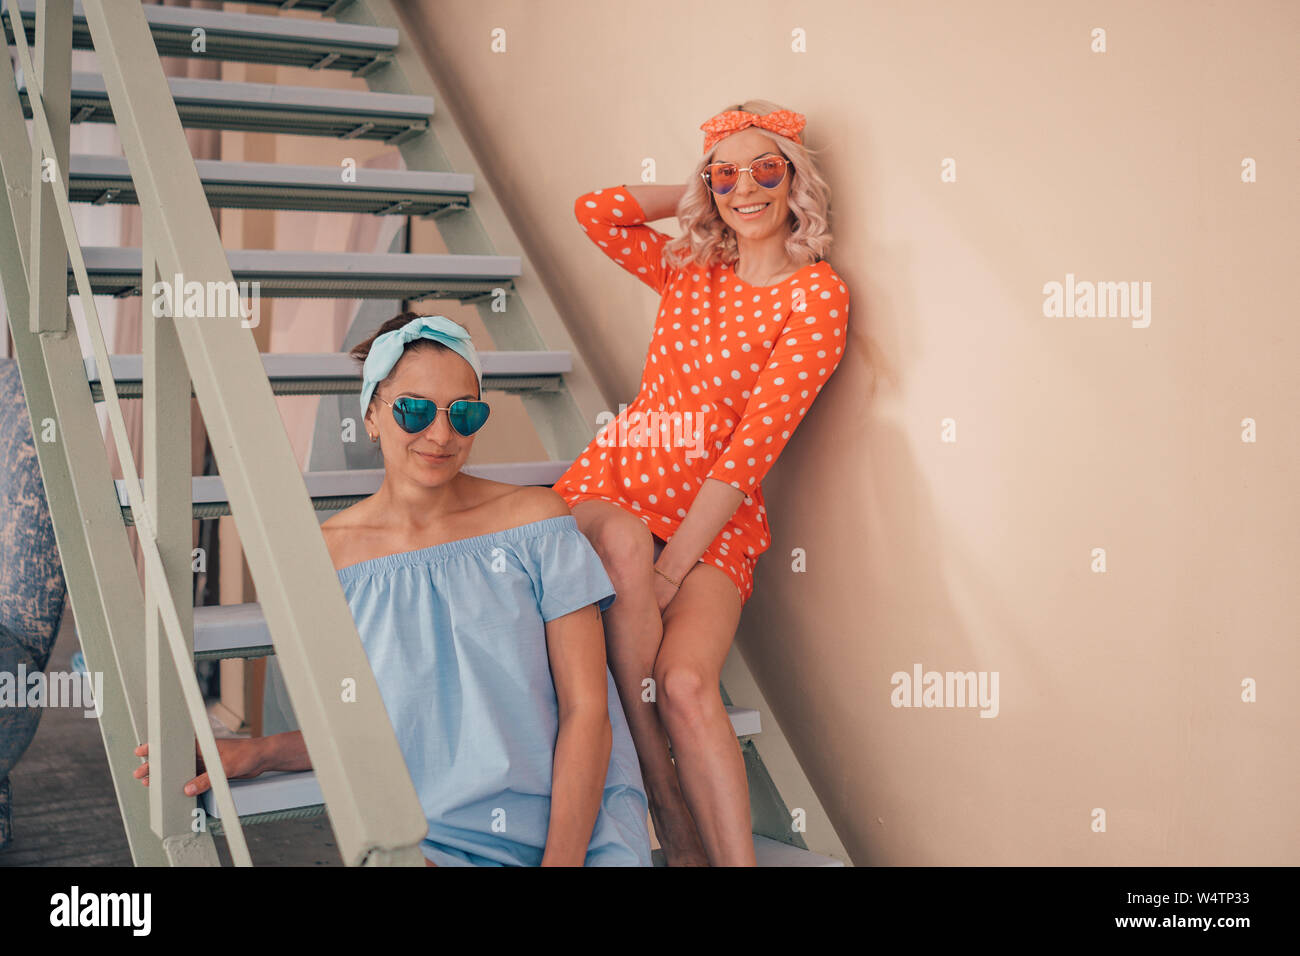 Sexy young girls in pin-up style pose on the stairs. Women's summer clothing  Stock Photo - Alamy